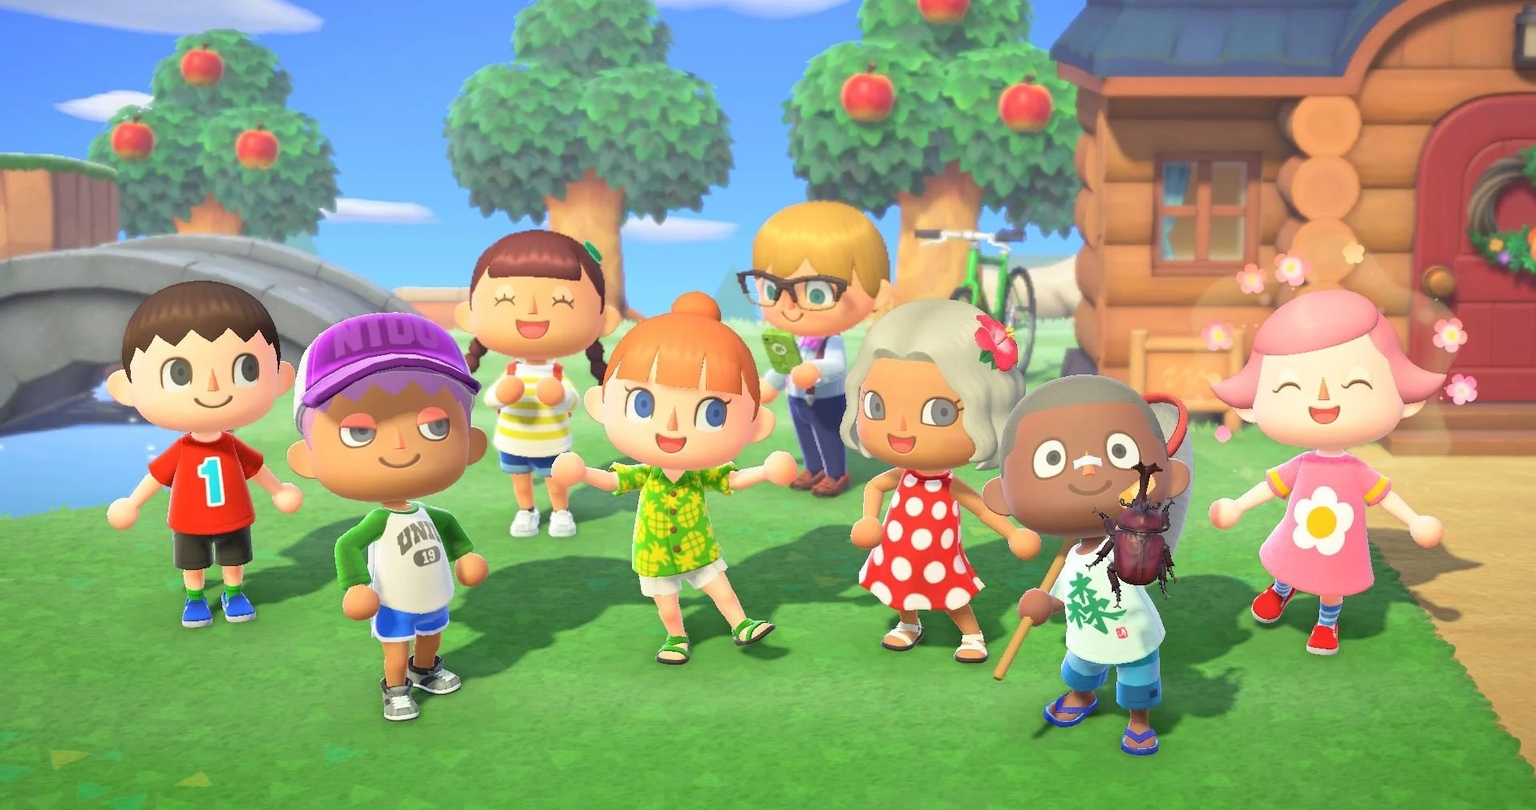 Download Or Share Custom Patterns With Nook Island – An Animal Crossing Reference And Pattern Website